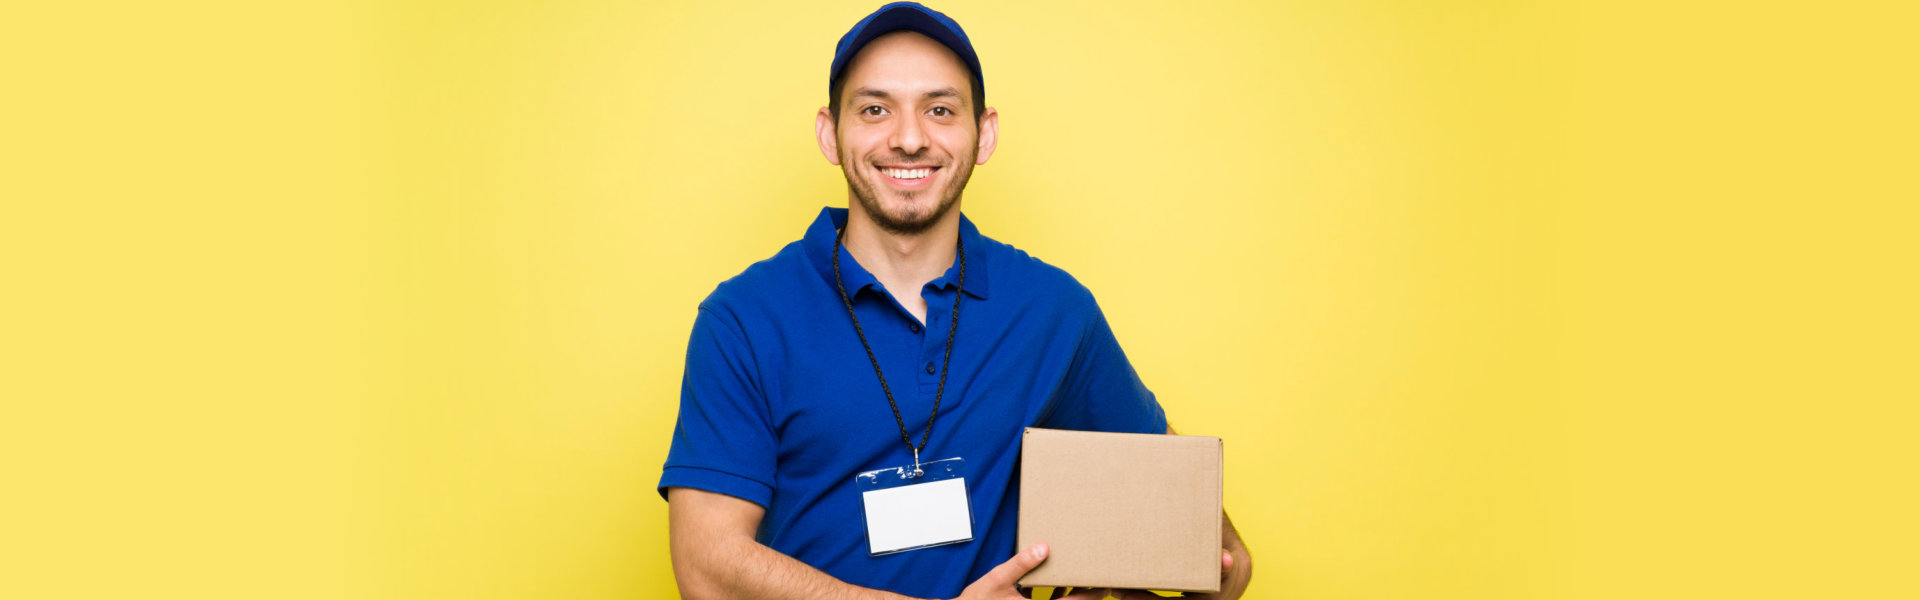 delivery man smiling